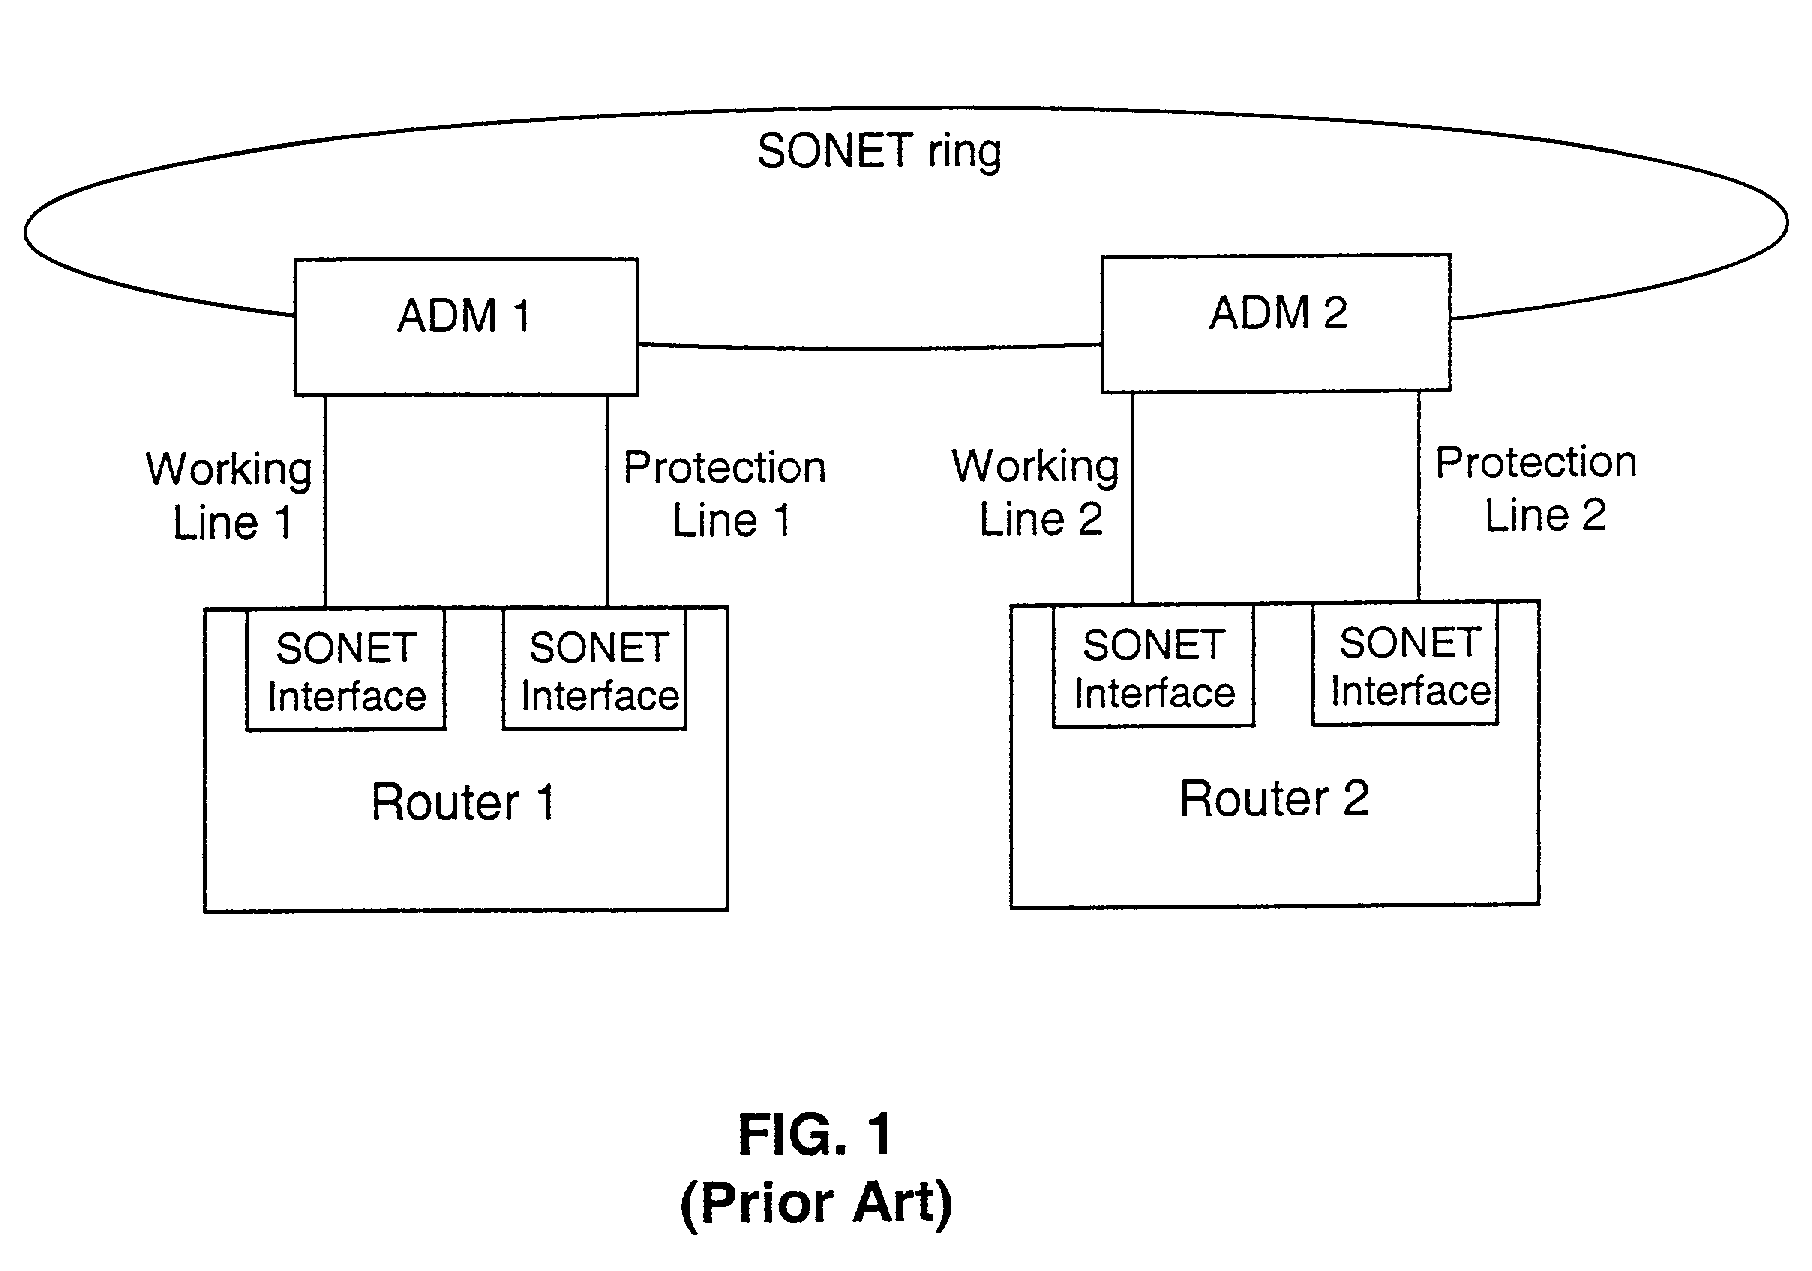 Fault tolerant automatic protection switching for distributed routers